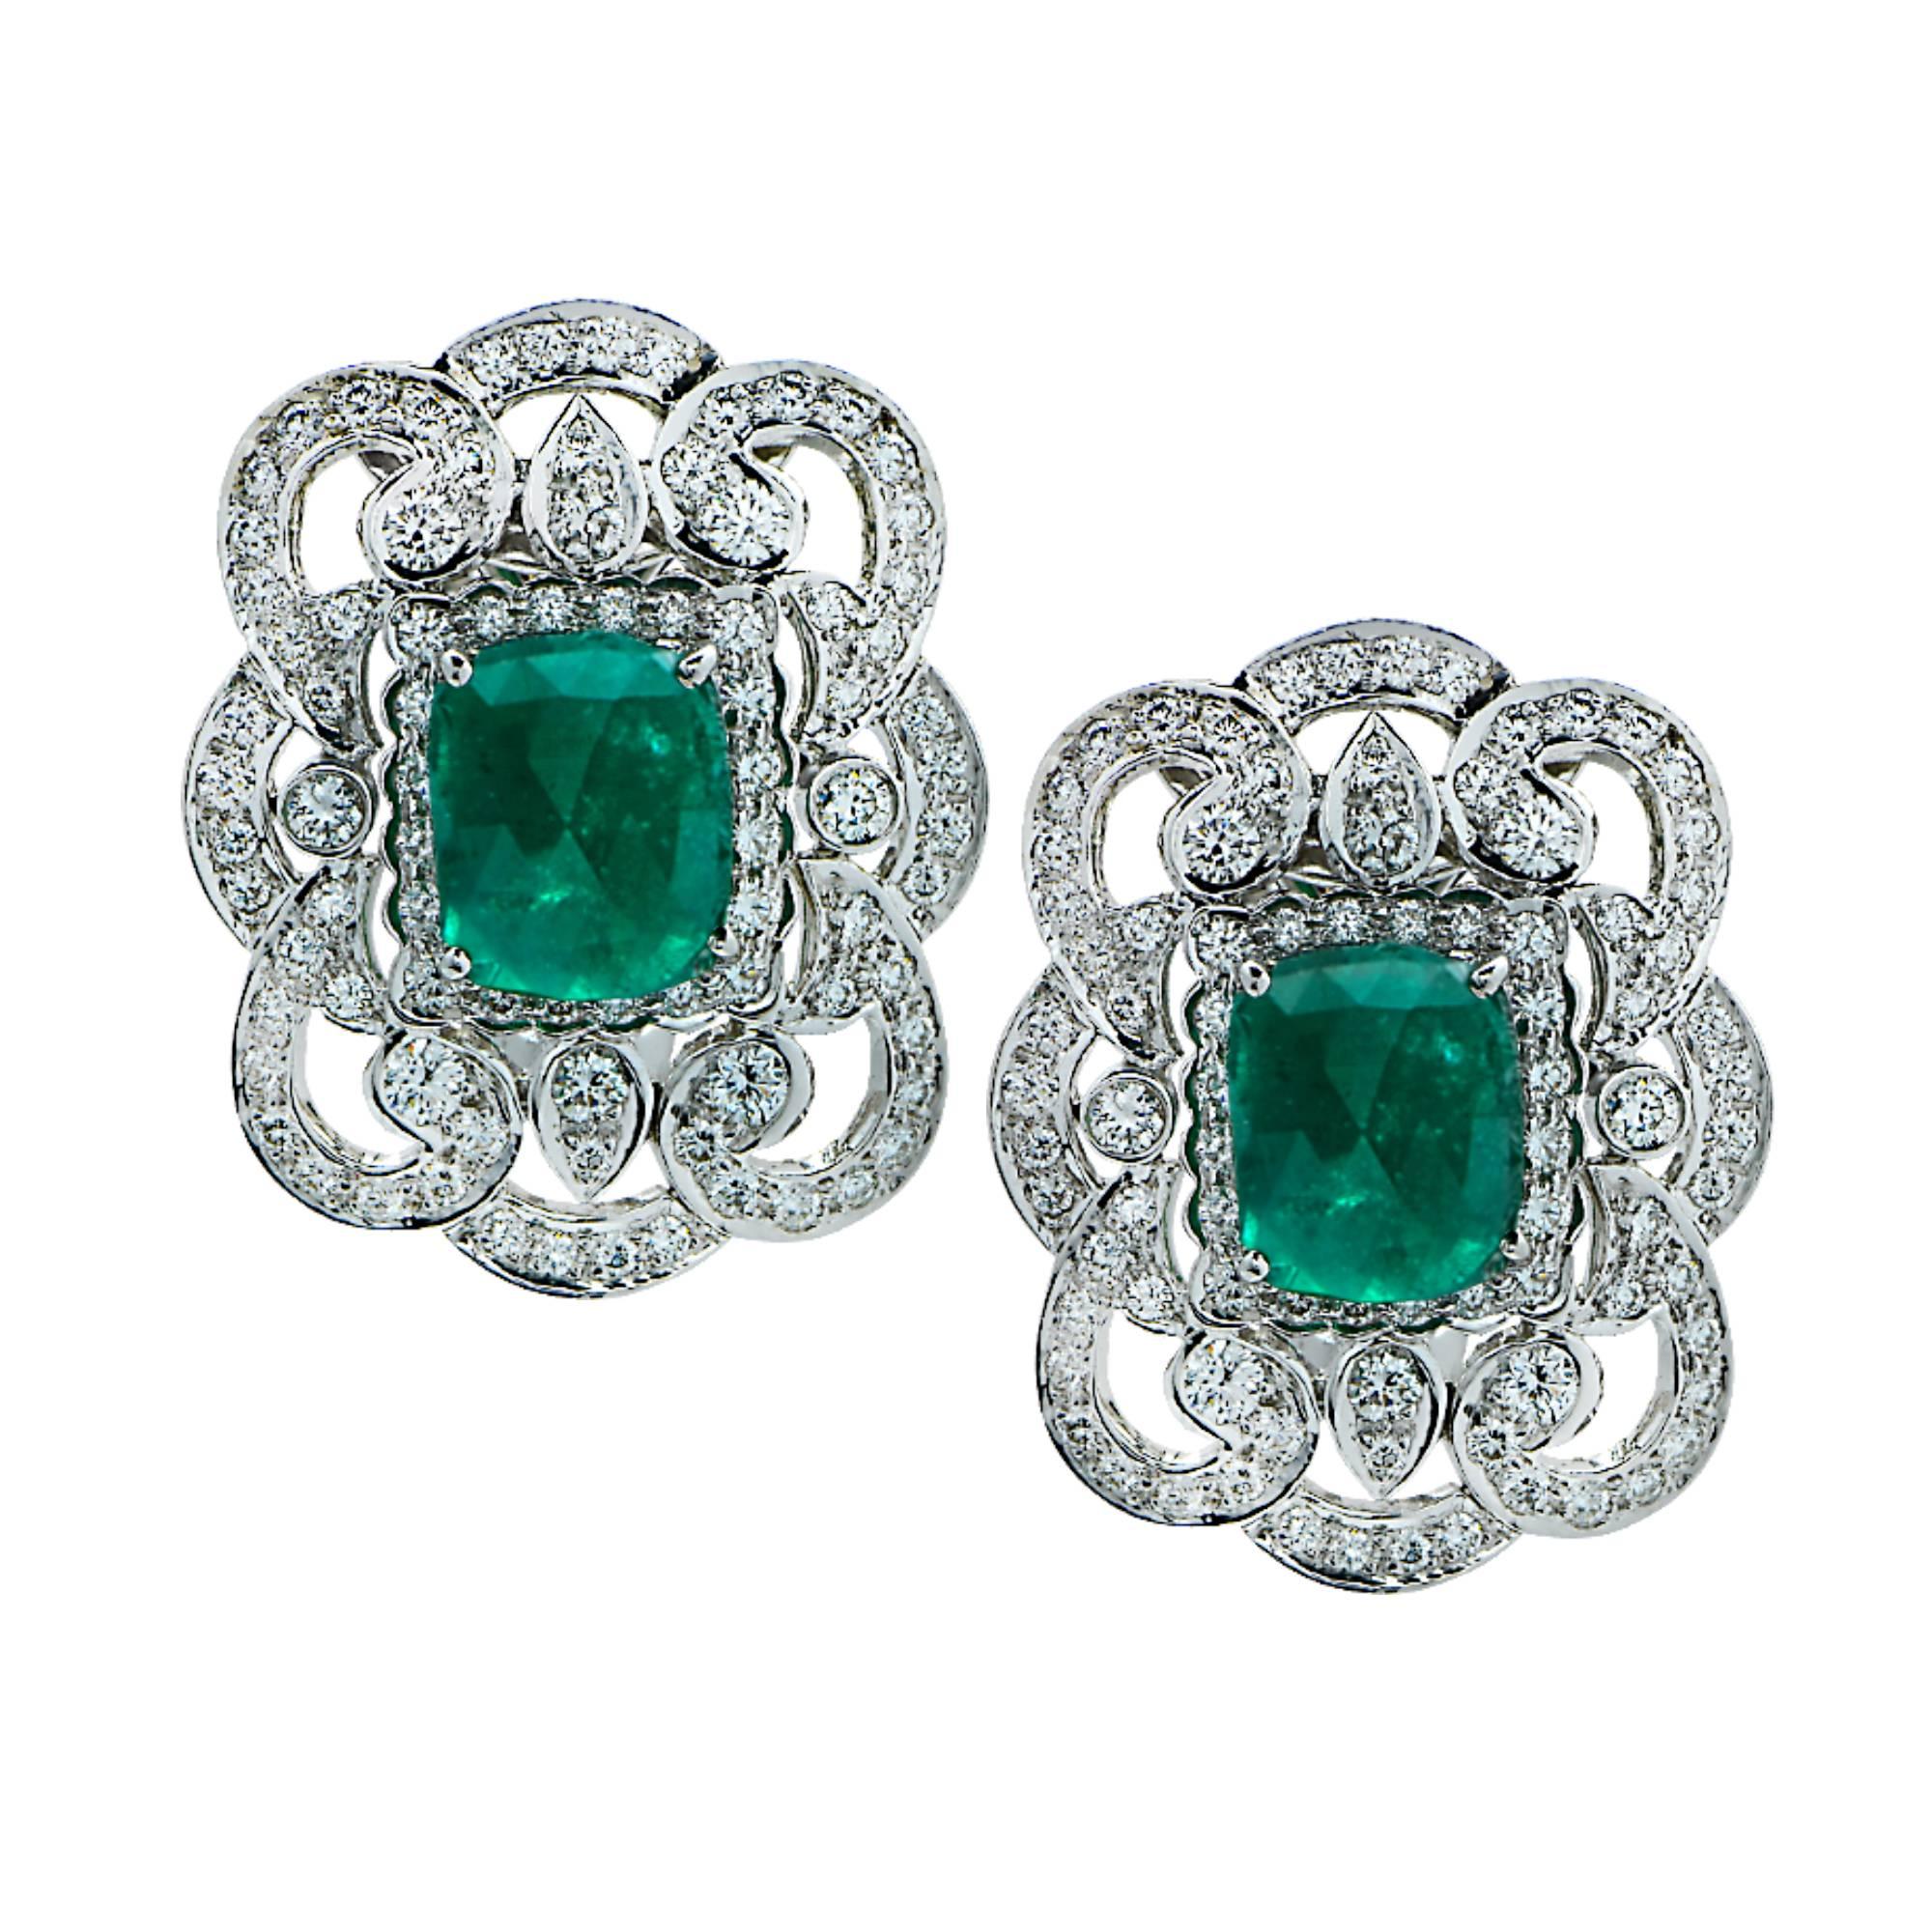 Baroque Captivating Emerald and Diamond Earrings and Necklace 18 Karat White Gold Set